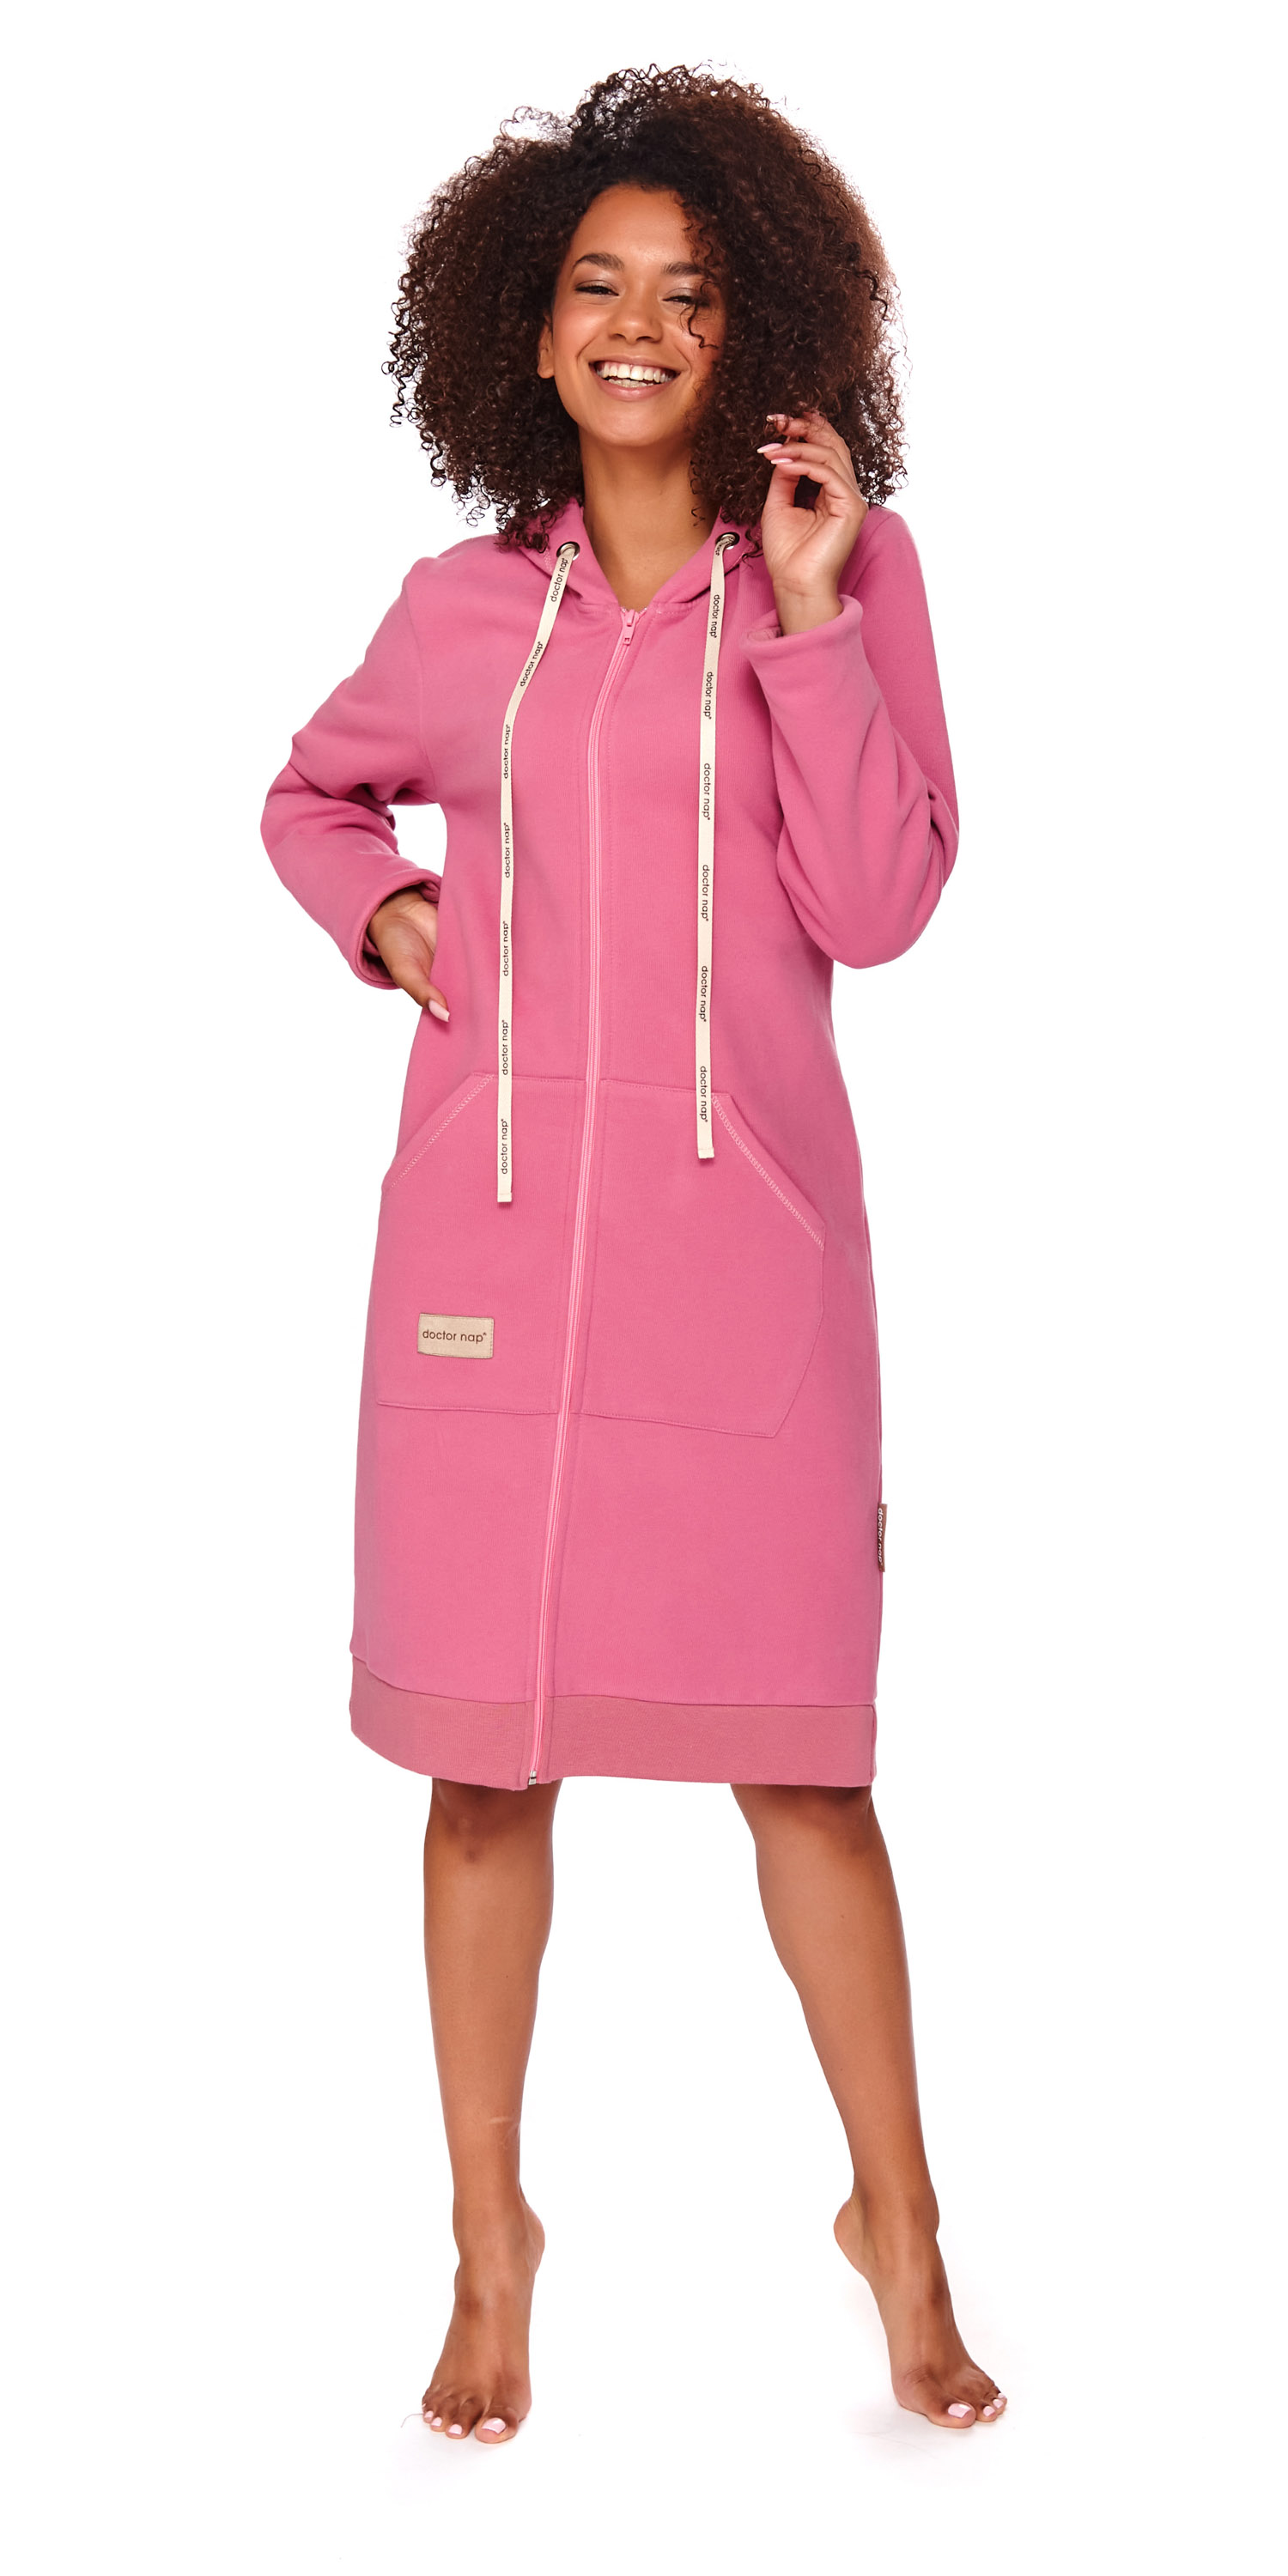 Doctor Nap Woman's Dressing Gown Smz.9756.